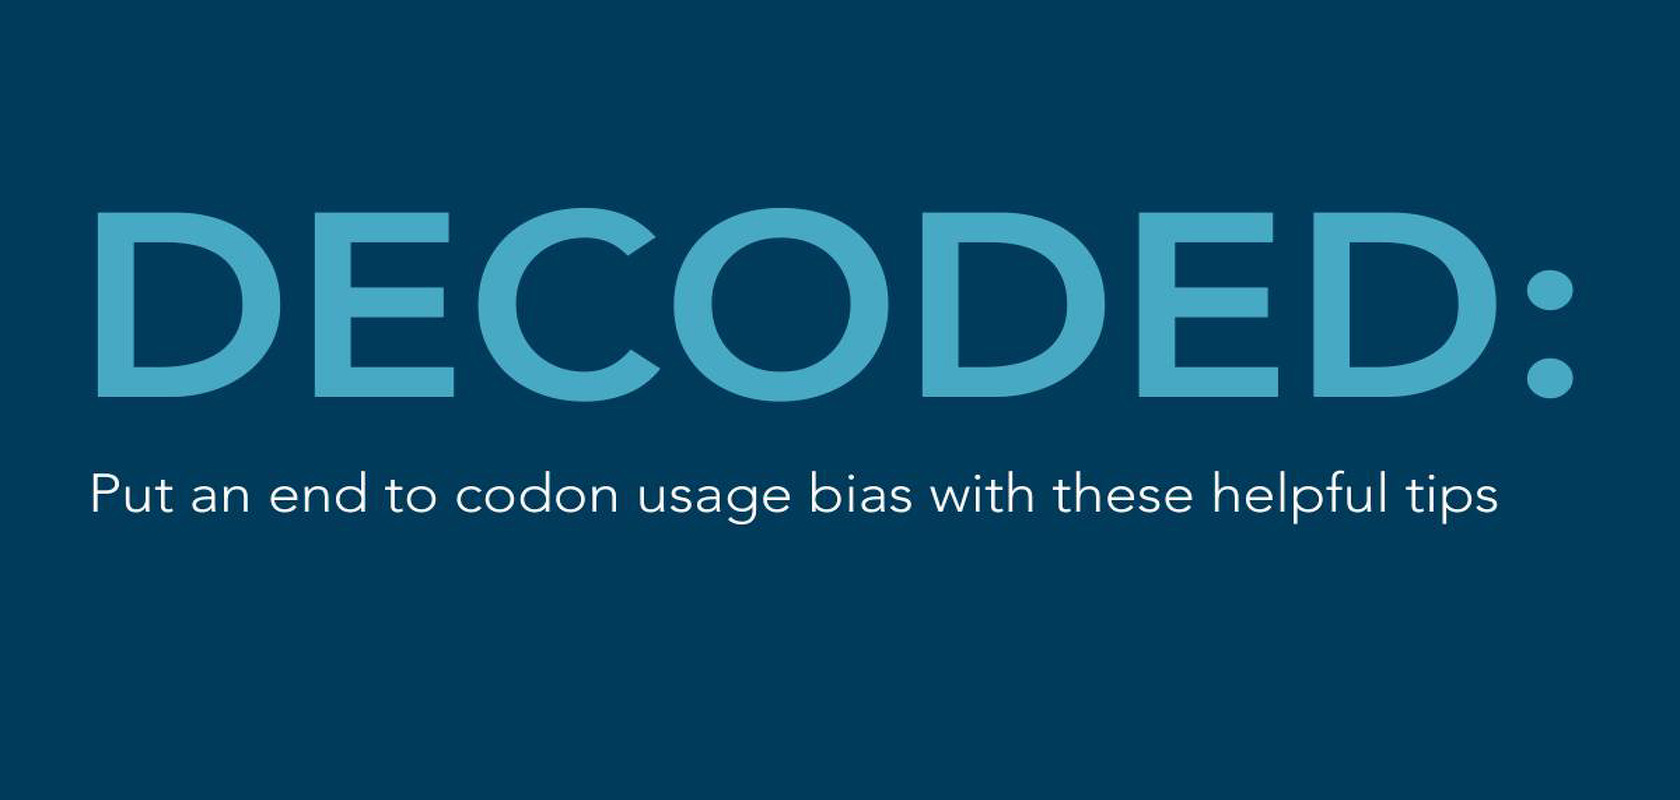 Put an end to codon usage bias with these helpful tips